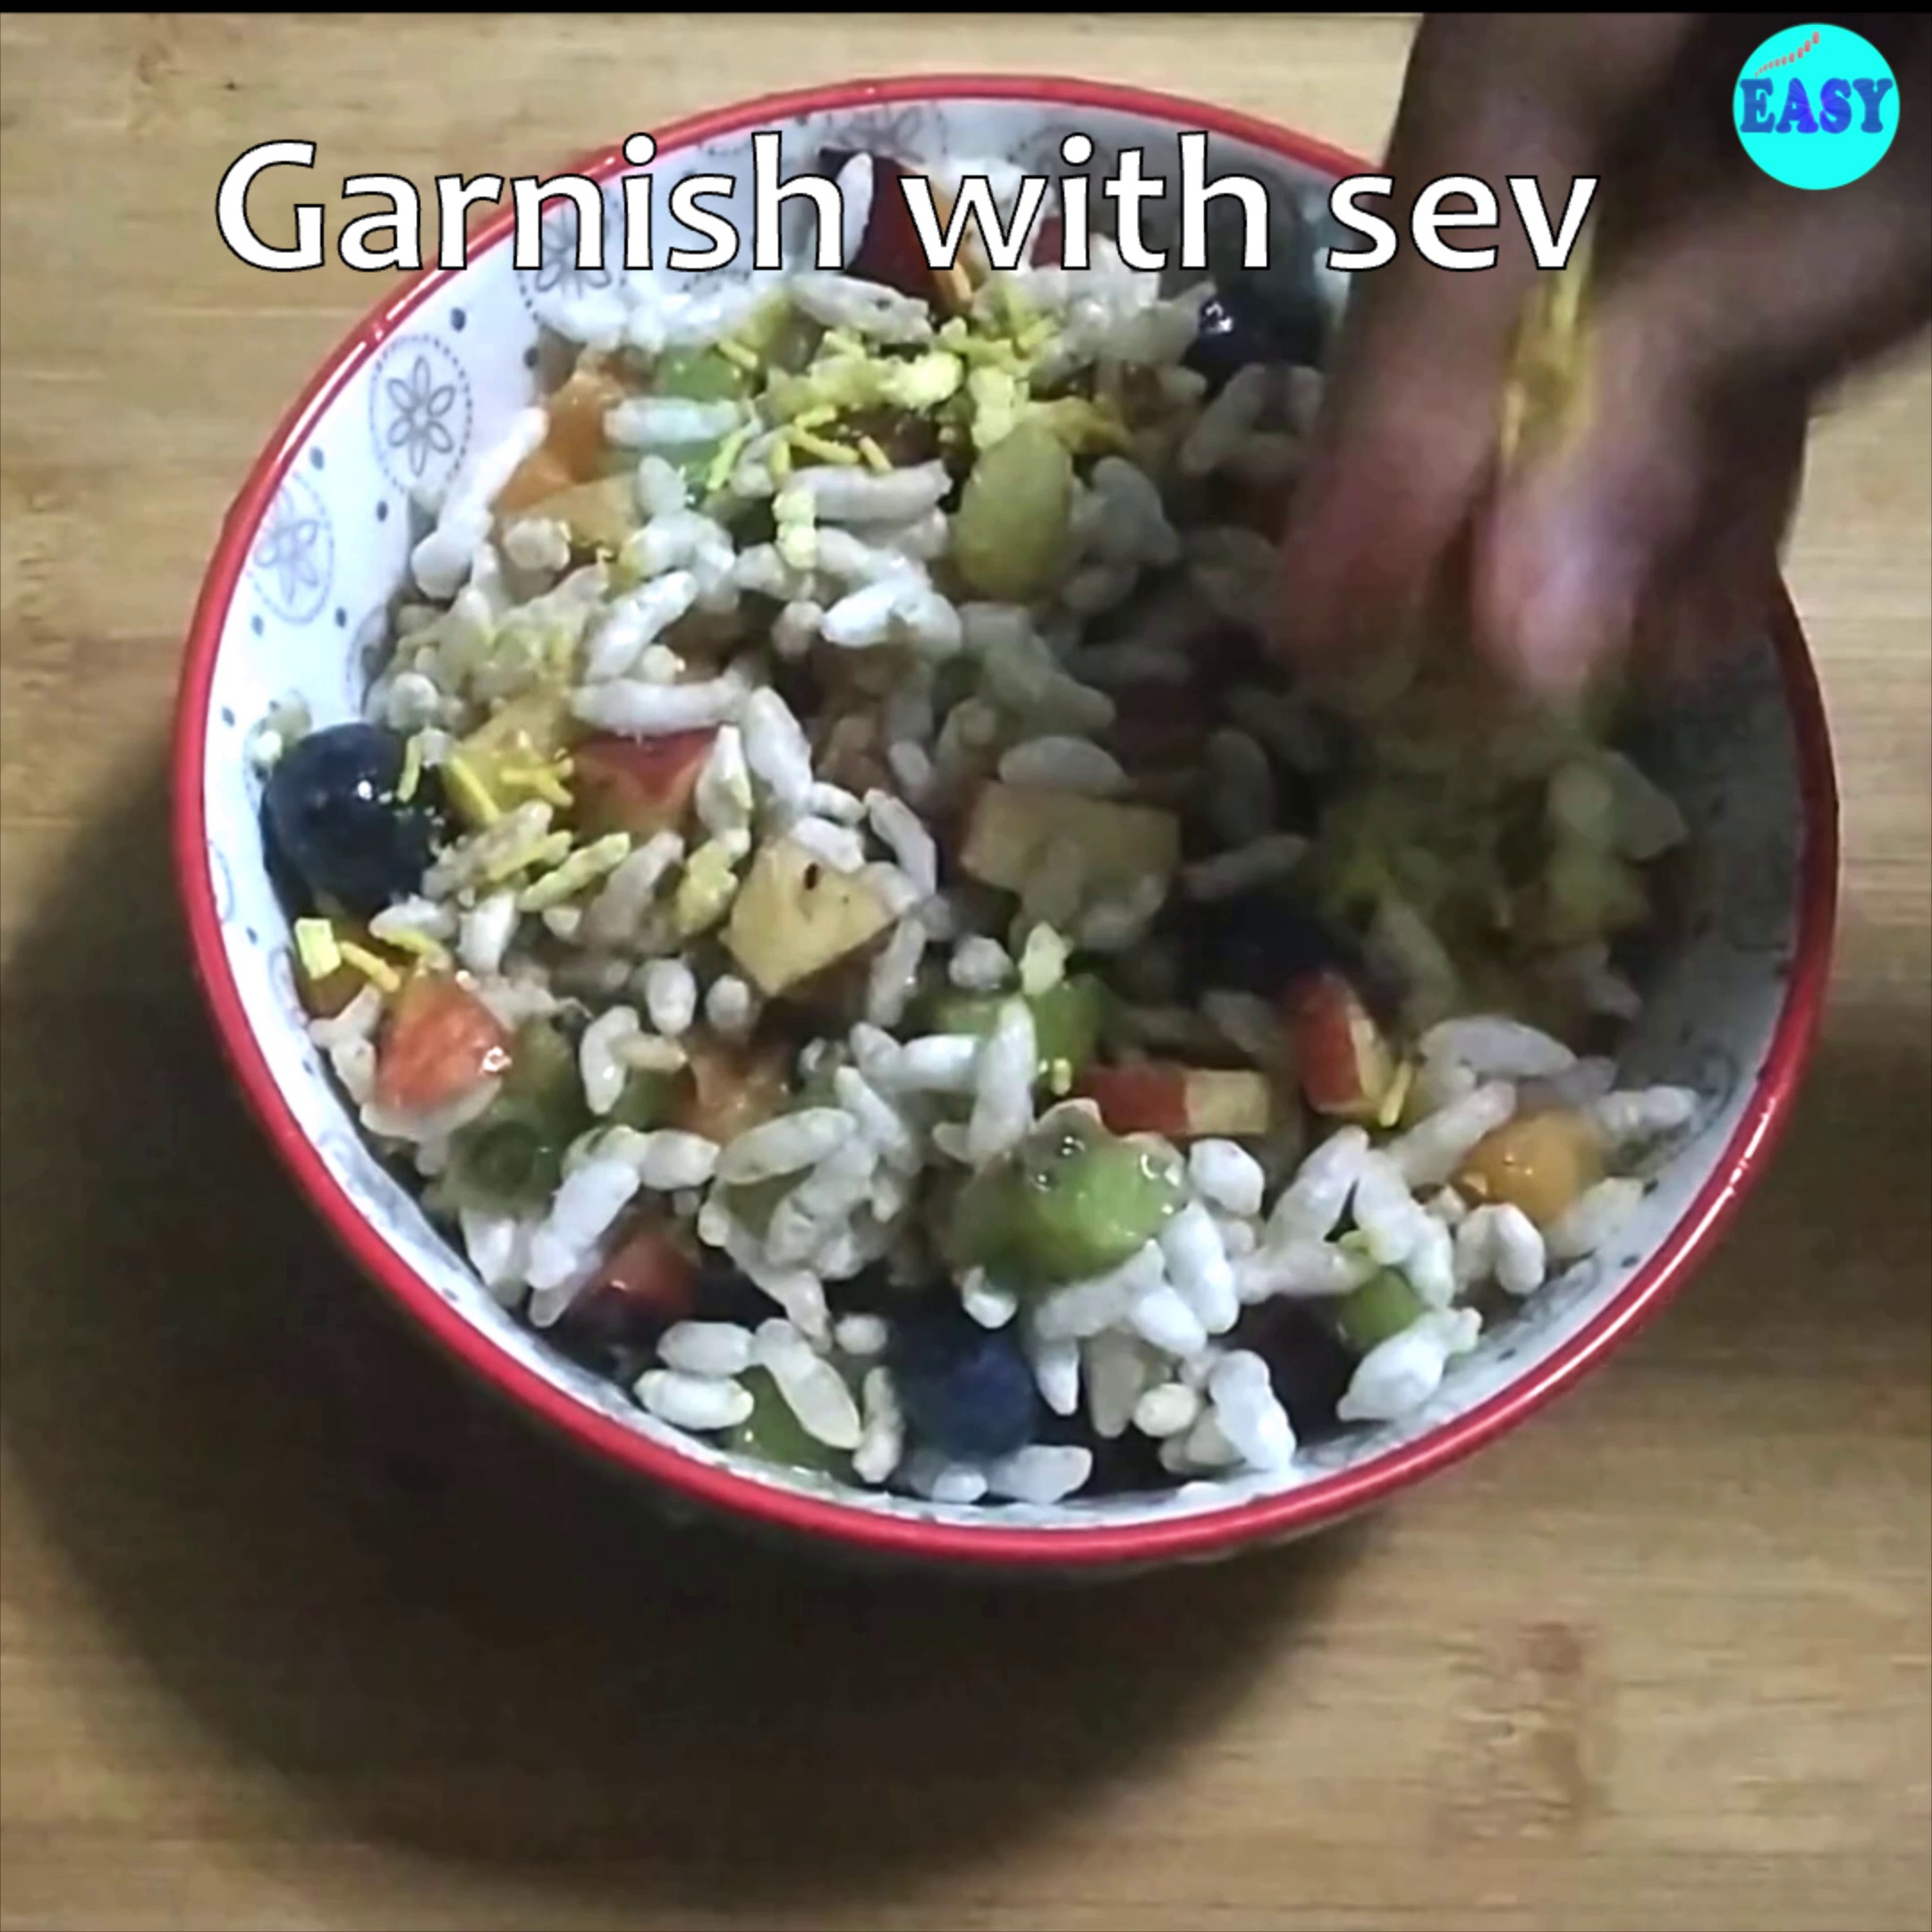 Step 5 - Garnish with some sev or namkeen of your choice, if you like.